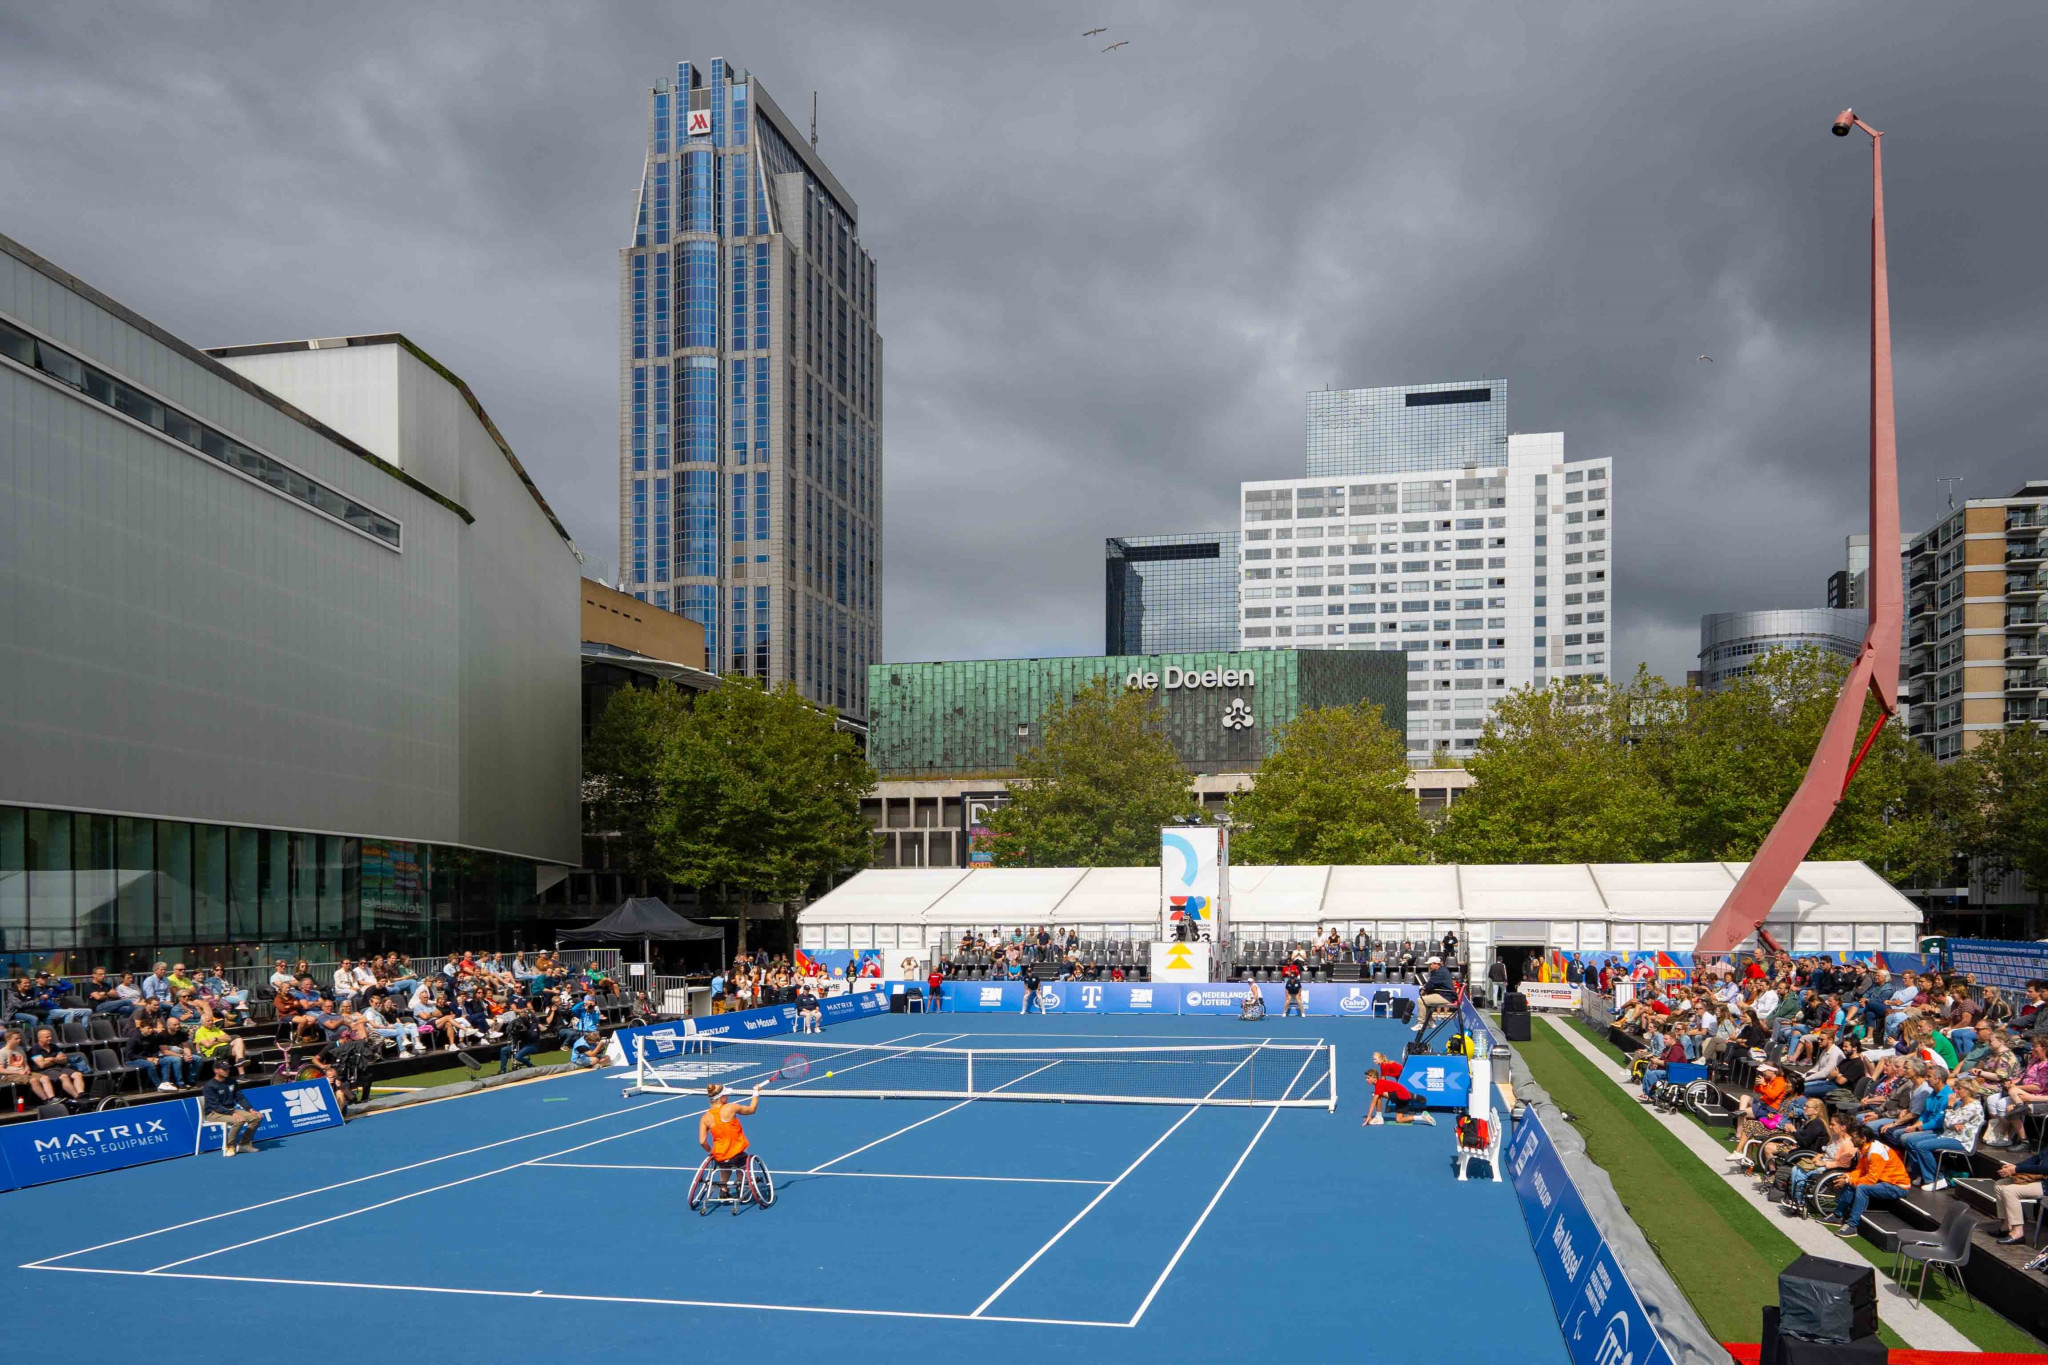 Dutch fans watched the action at Schouwburgplein in the centre of Rotterdam which staged the wheelchair tennis finals during the inaugural European Para Championships ©EPC